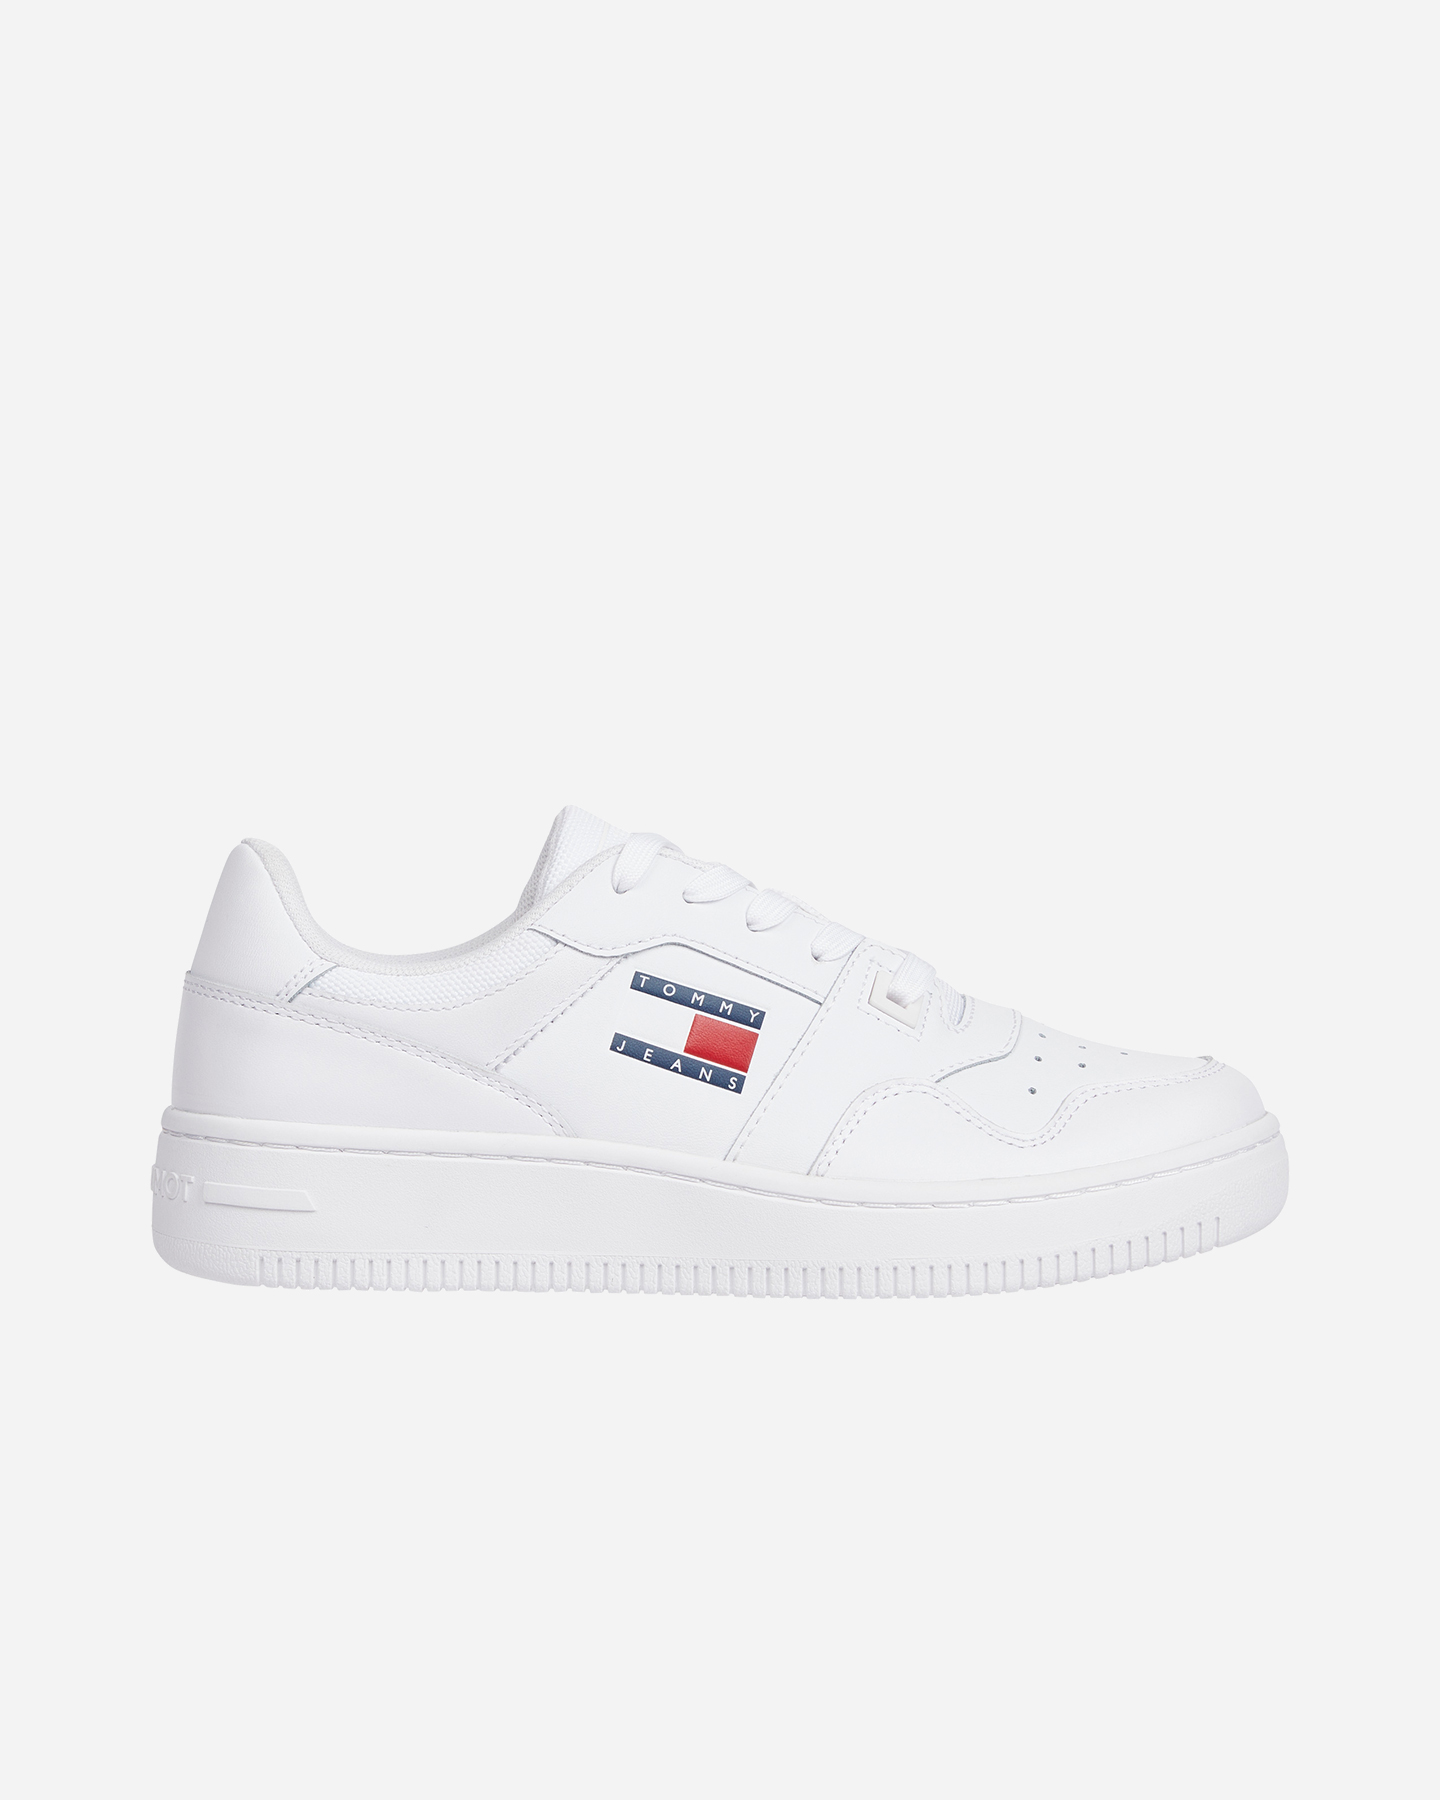 Image of Tommy Hilfiger Retro Basket W - Scarpe Sneakers - Donna